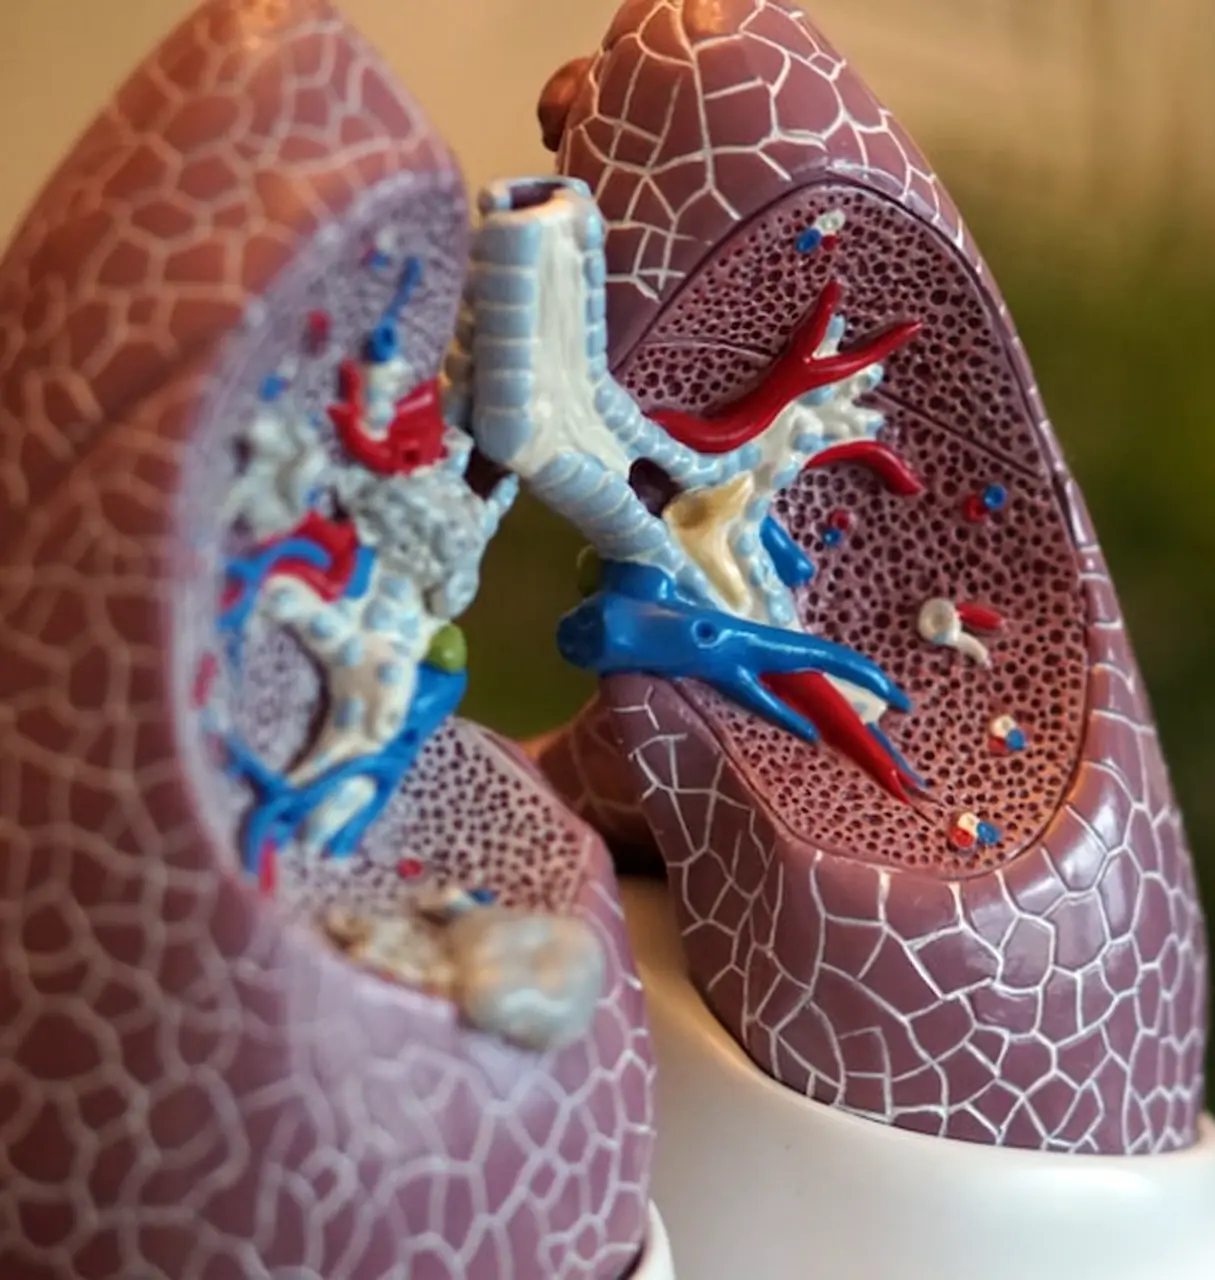 A plastic model of human lungs with the interior revealed to show blood vessels and airways.